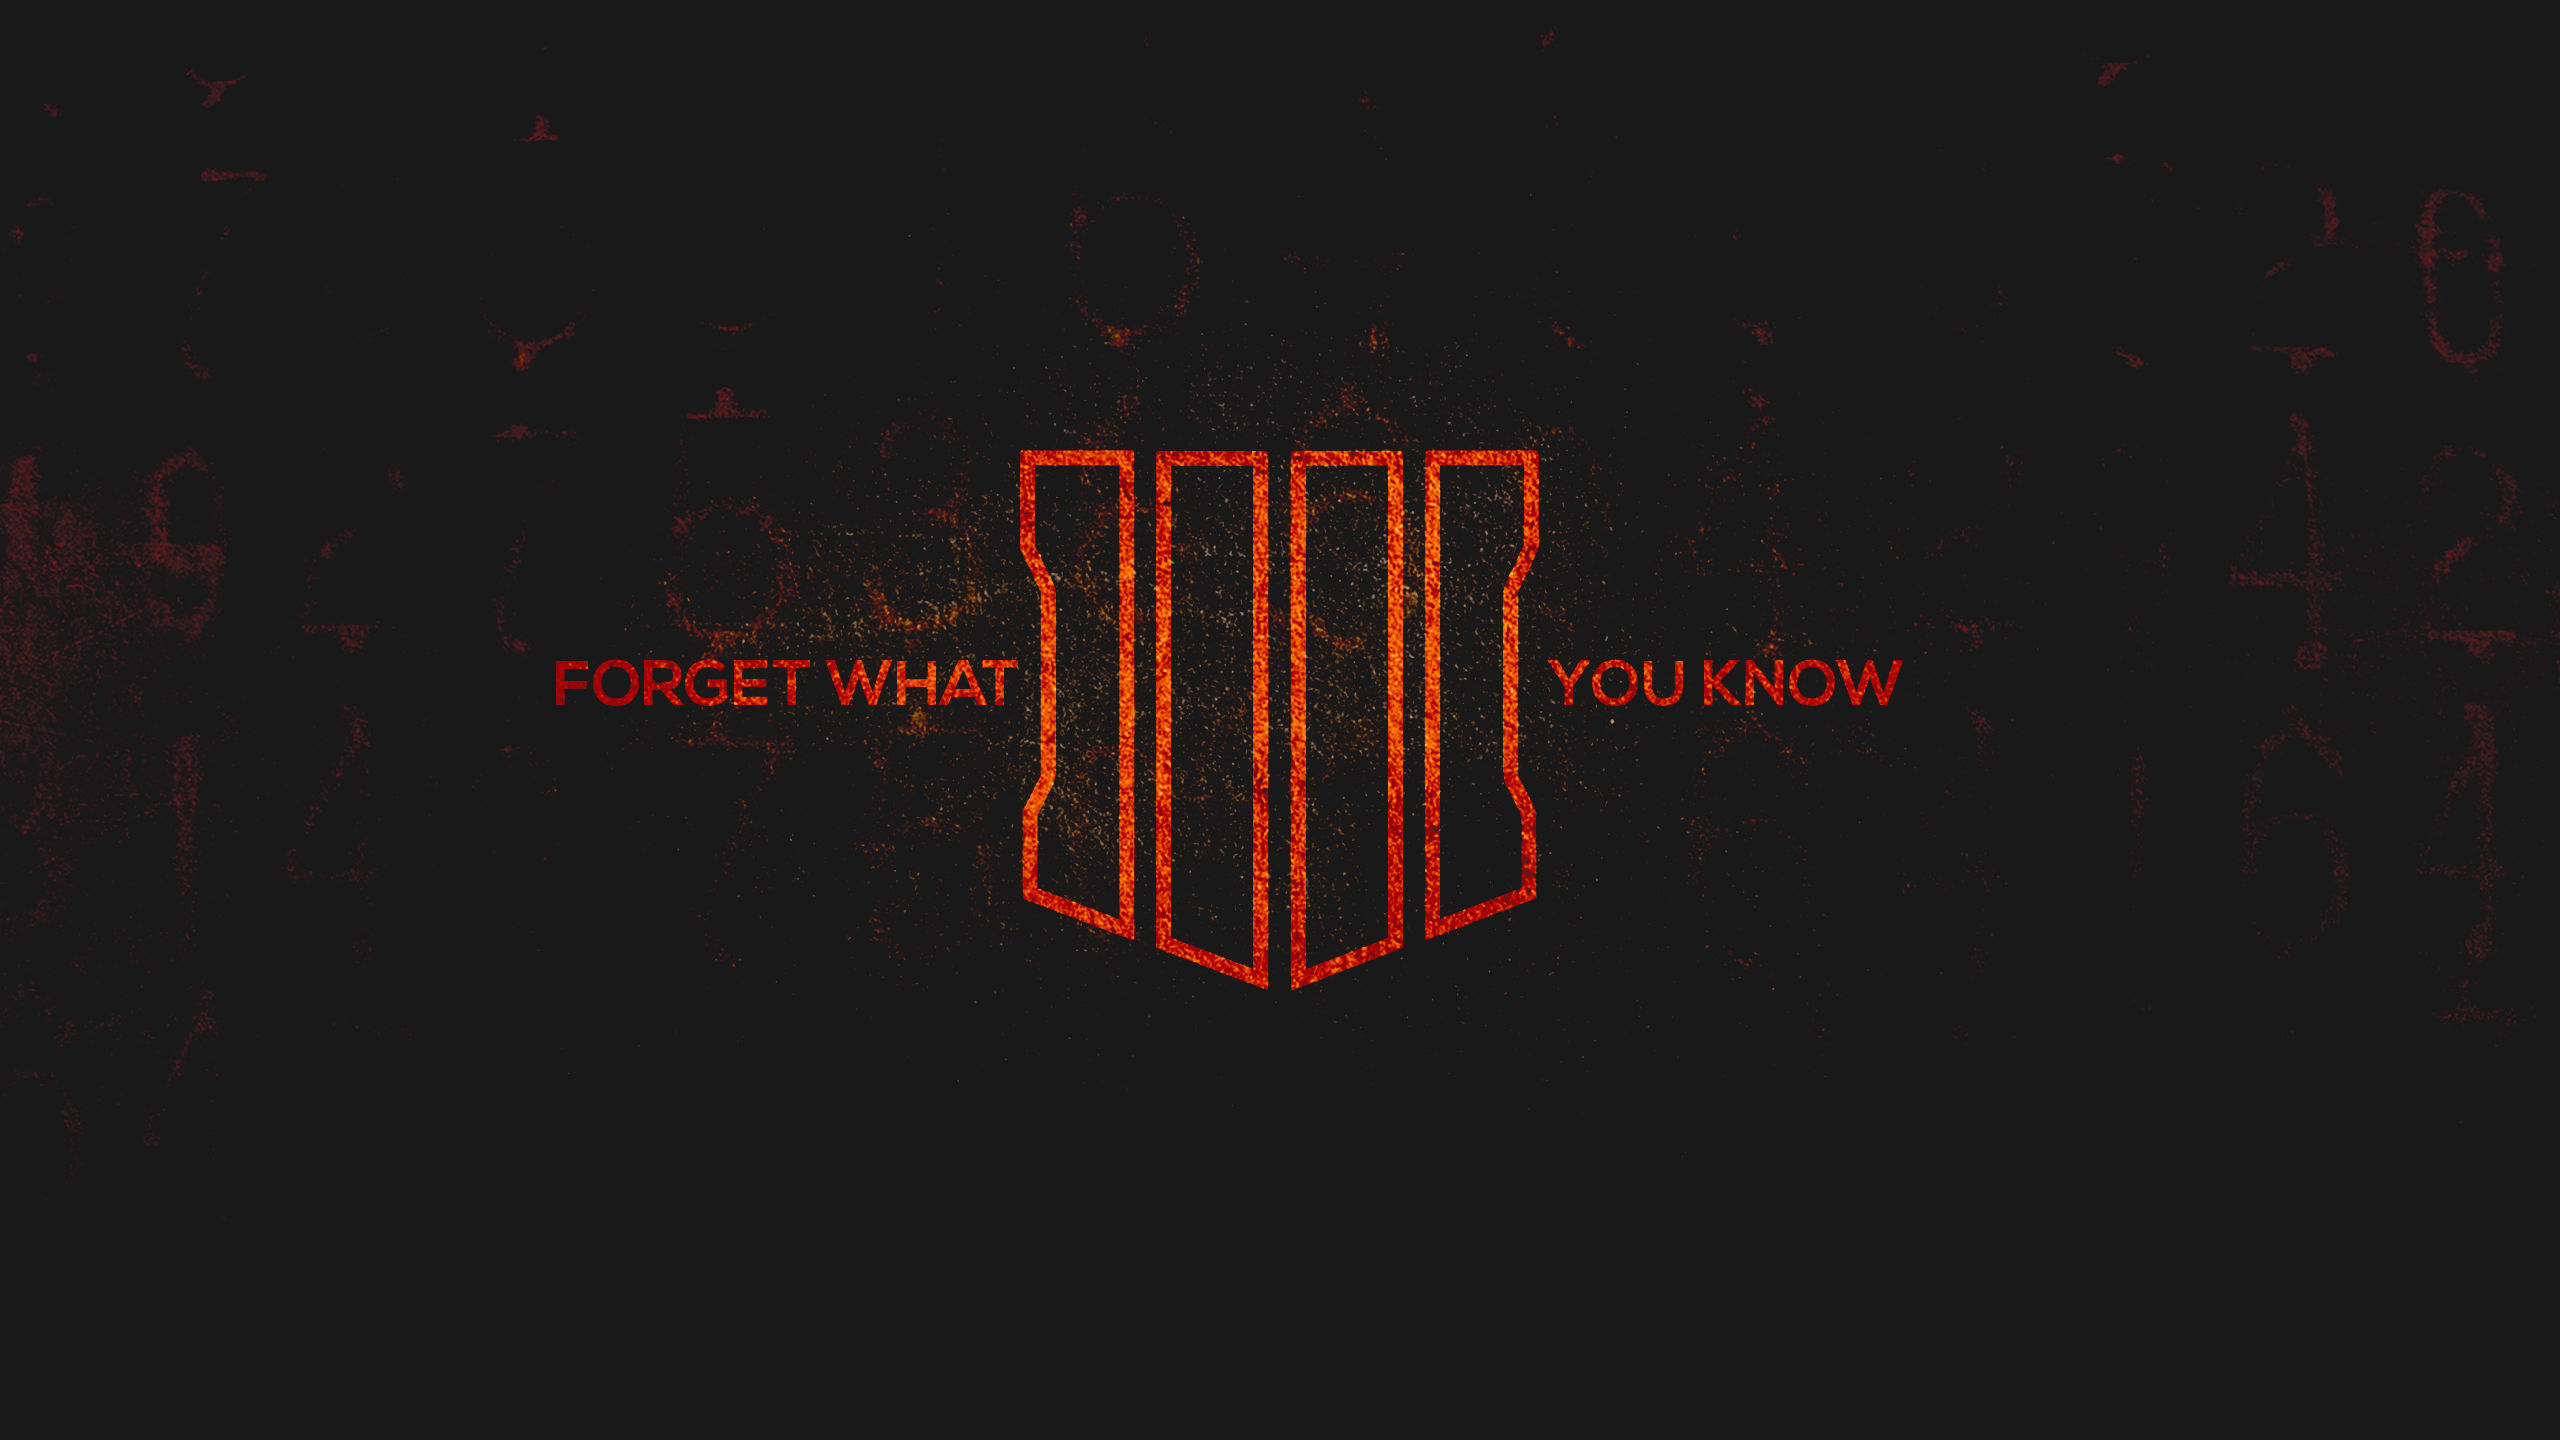 Call Of Duty Black Ops 4 Wallpapers Wallpaper Cave